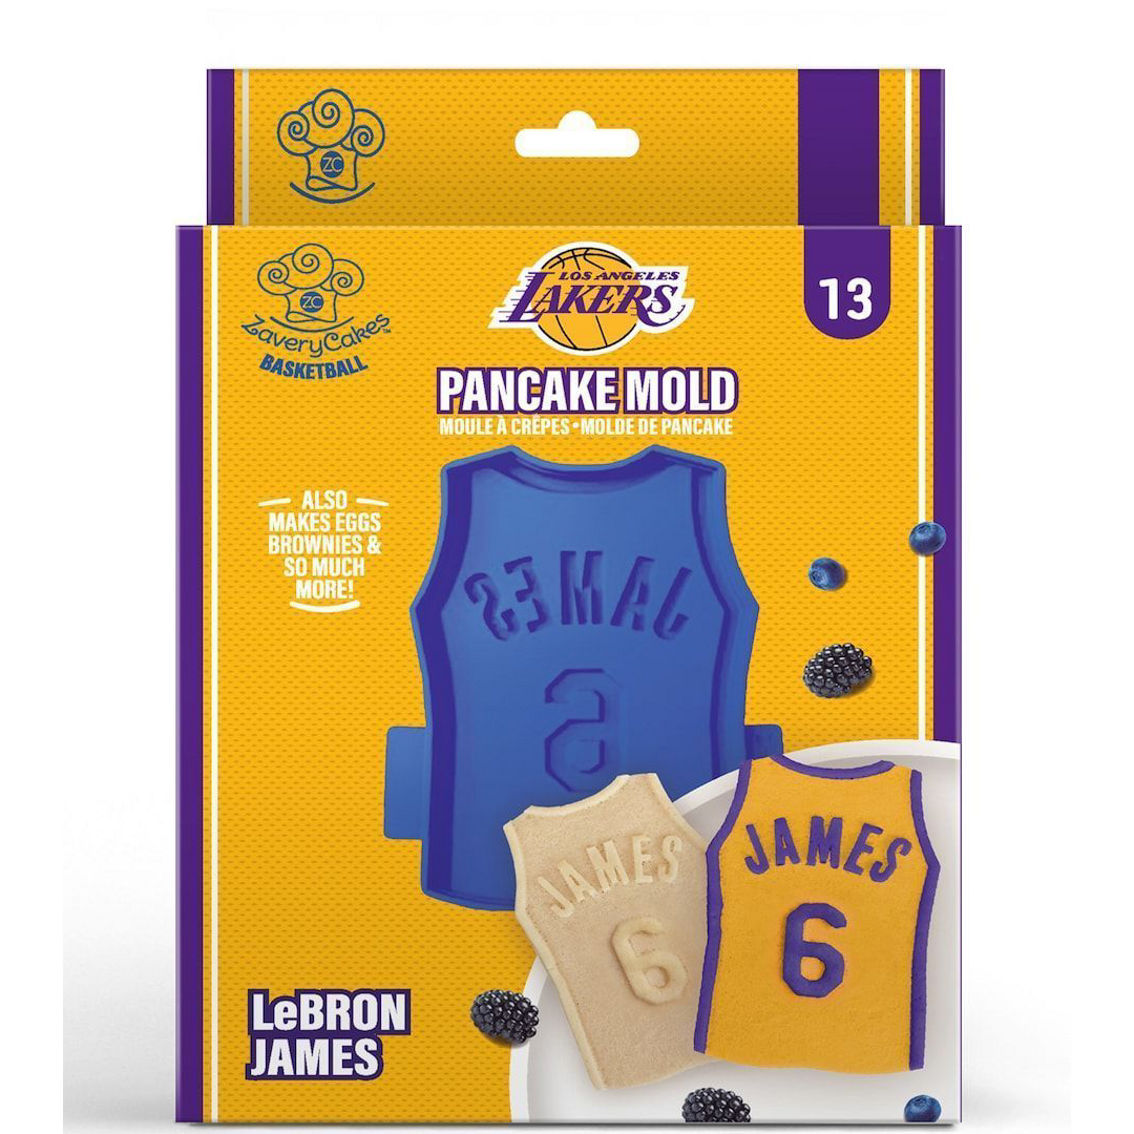 ZaveryCakes LeBron James Los Angeles Lakers Player Signature Food Mold - Image 2 of 3